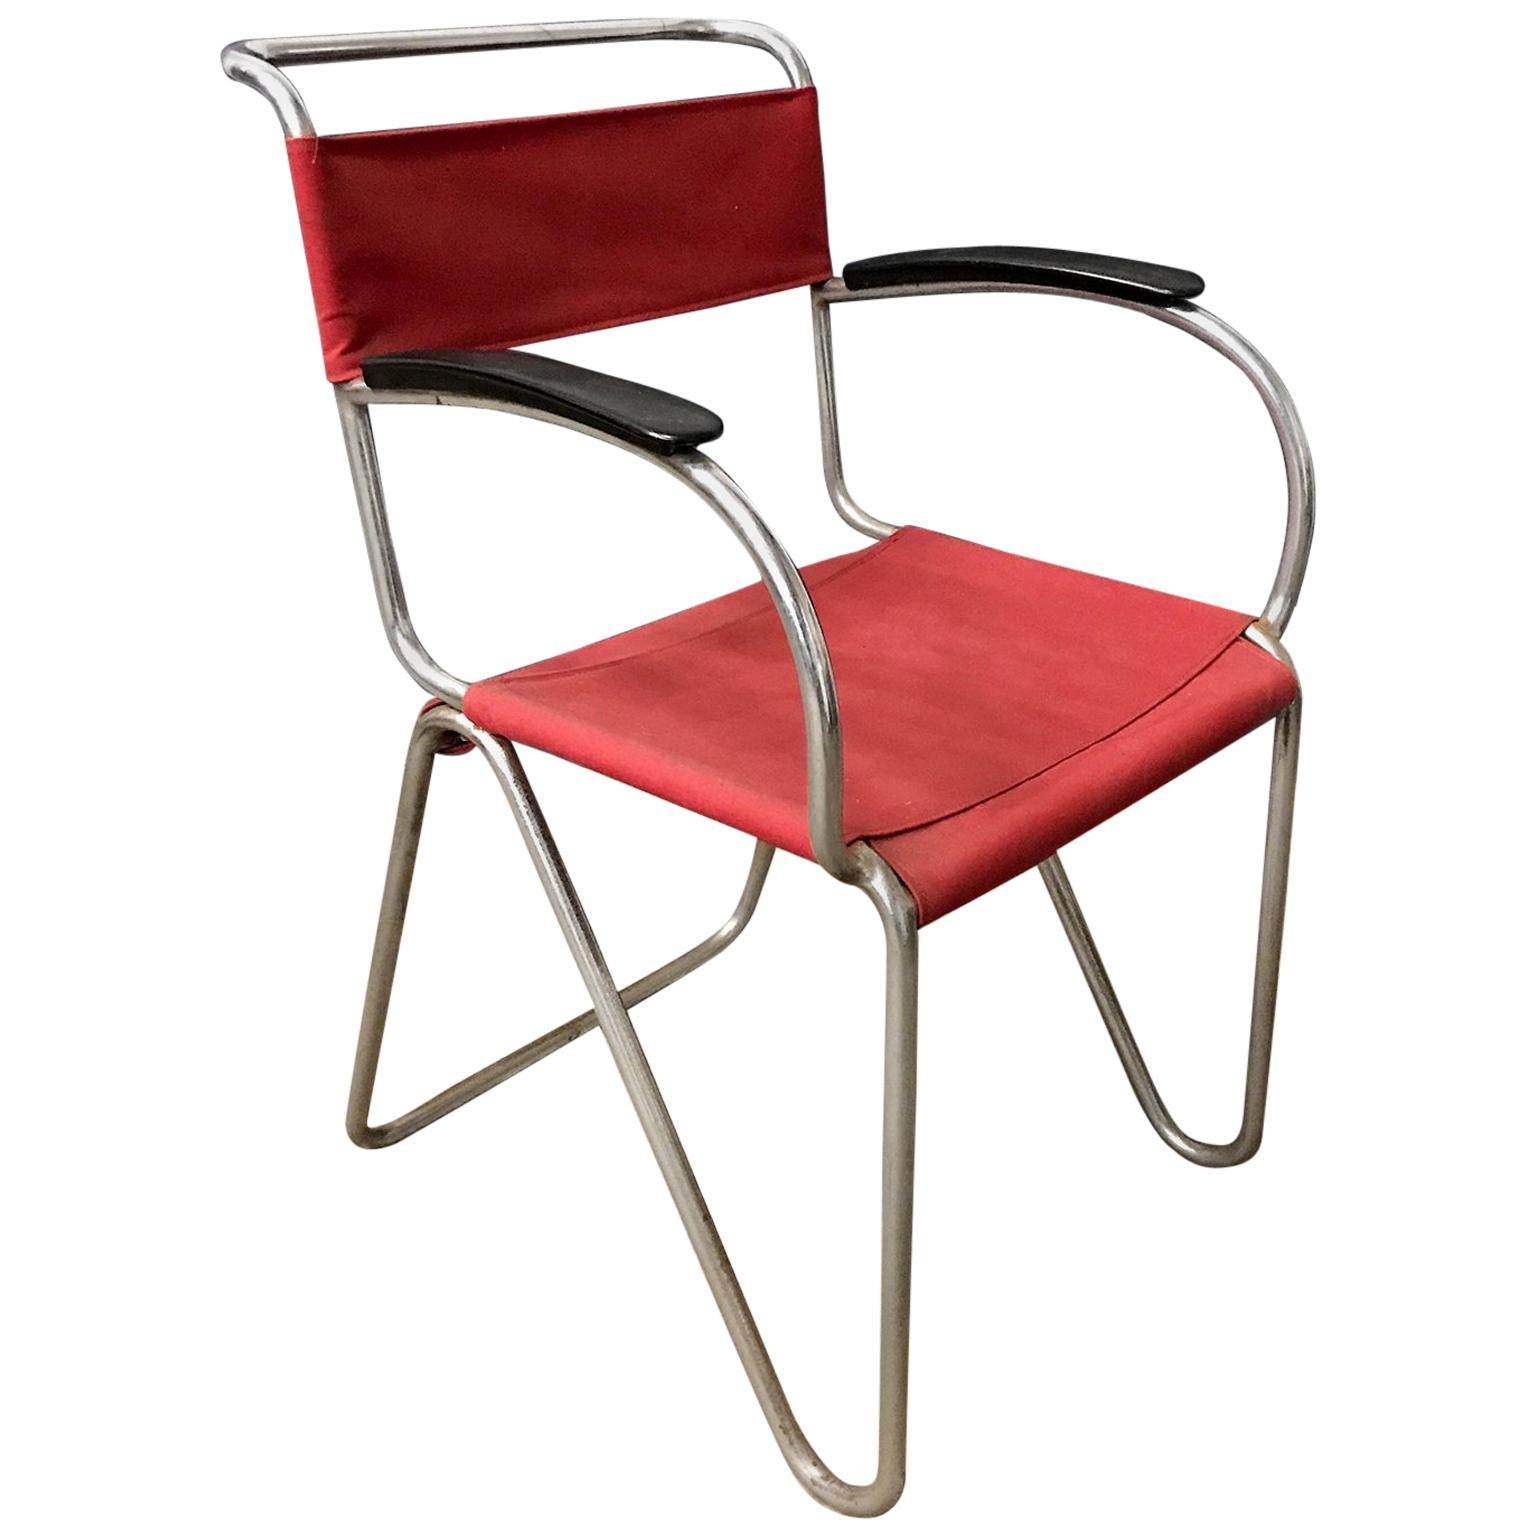 1930, W.H. Gispen for Gispen, Diagonal Chair 1930 in Rope & New Red Canvas Cover For Sale